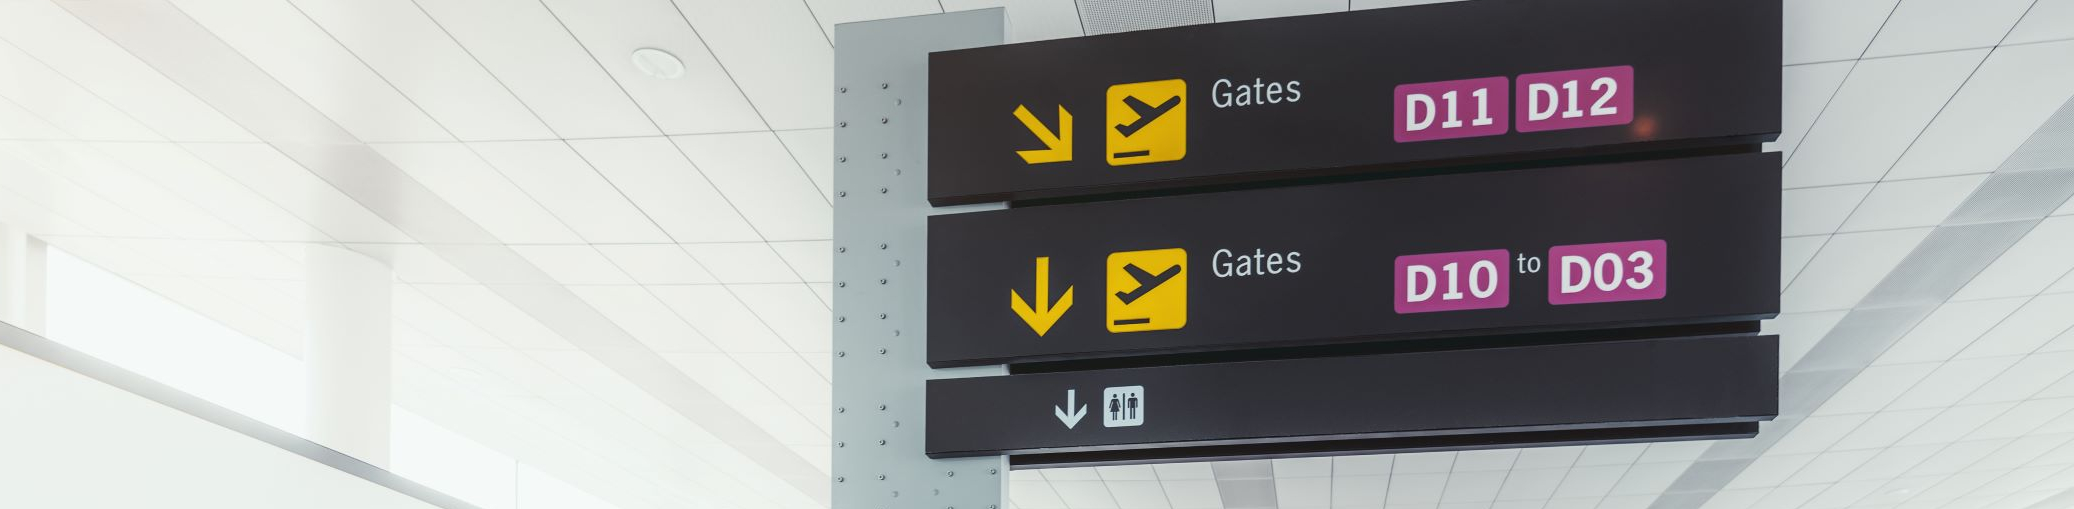 Airport signage, with gate information displayed